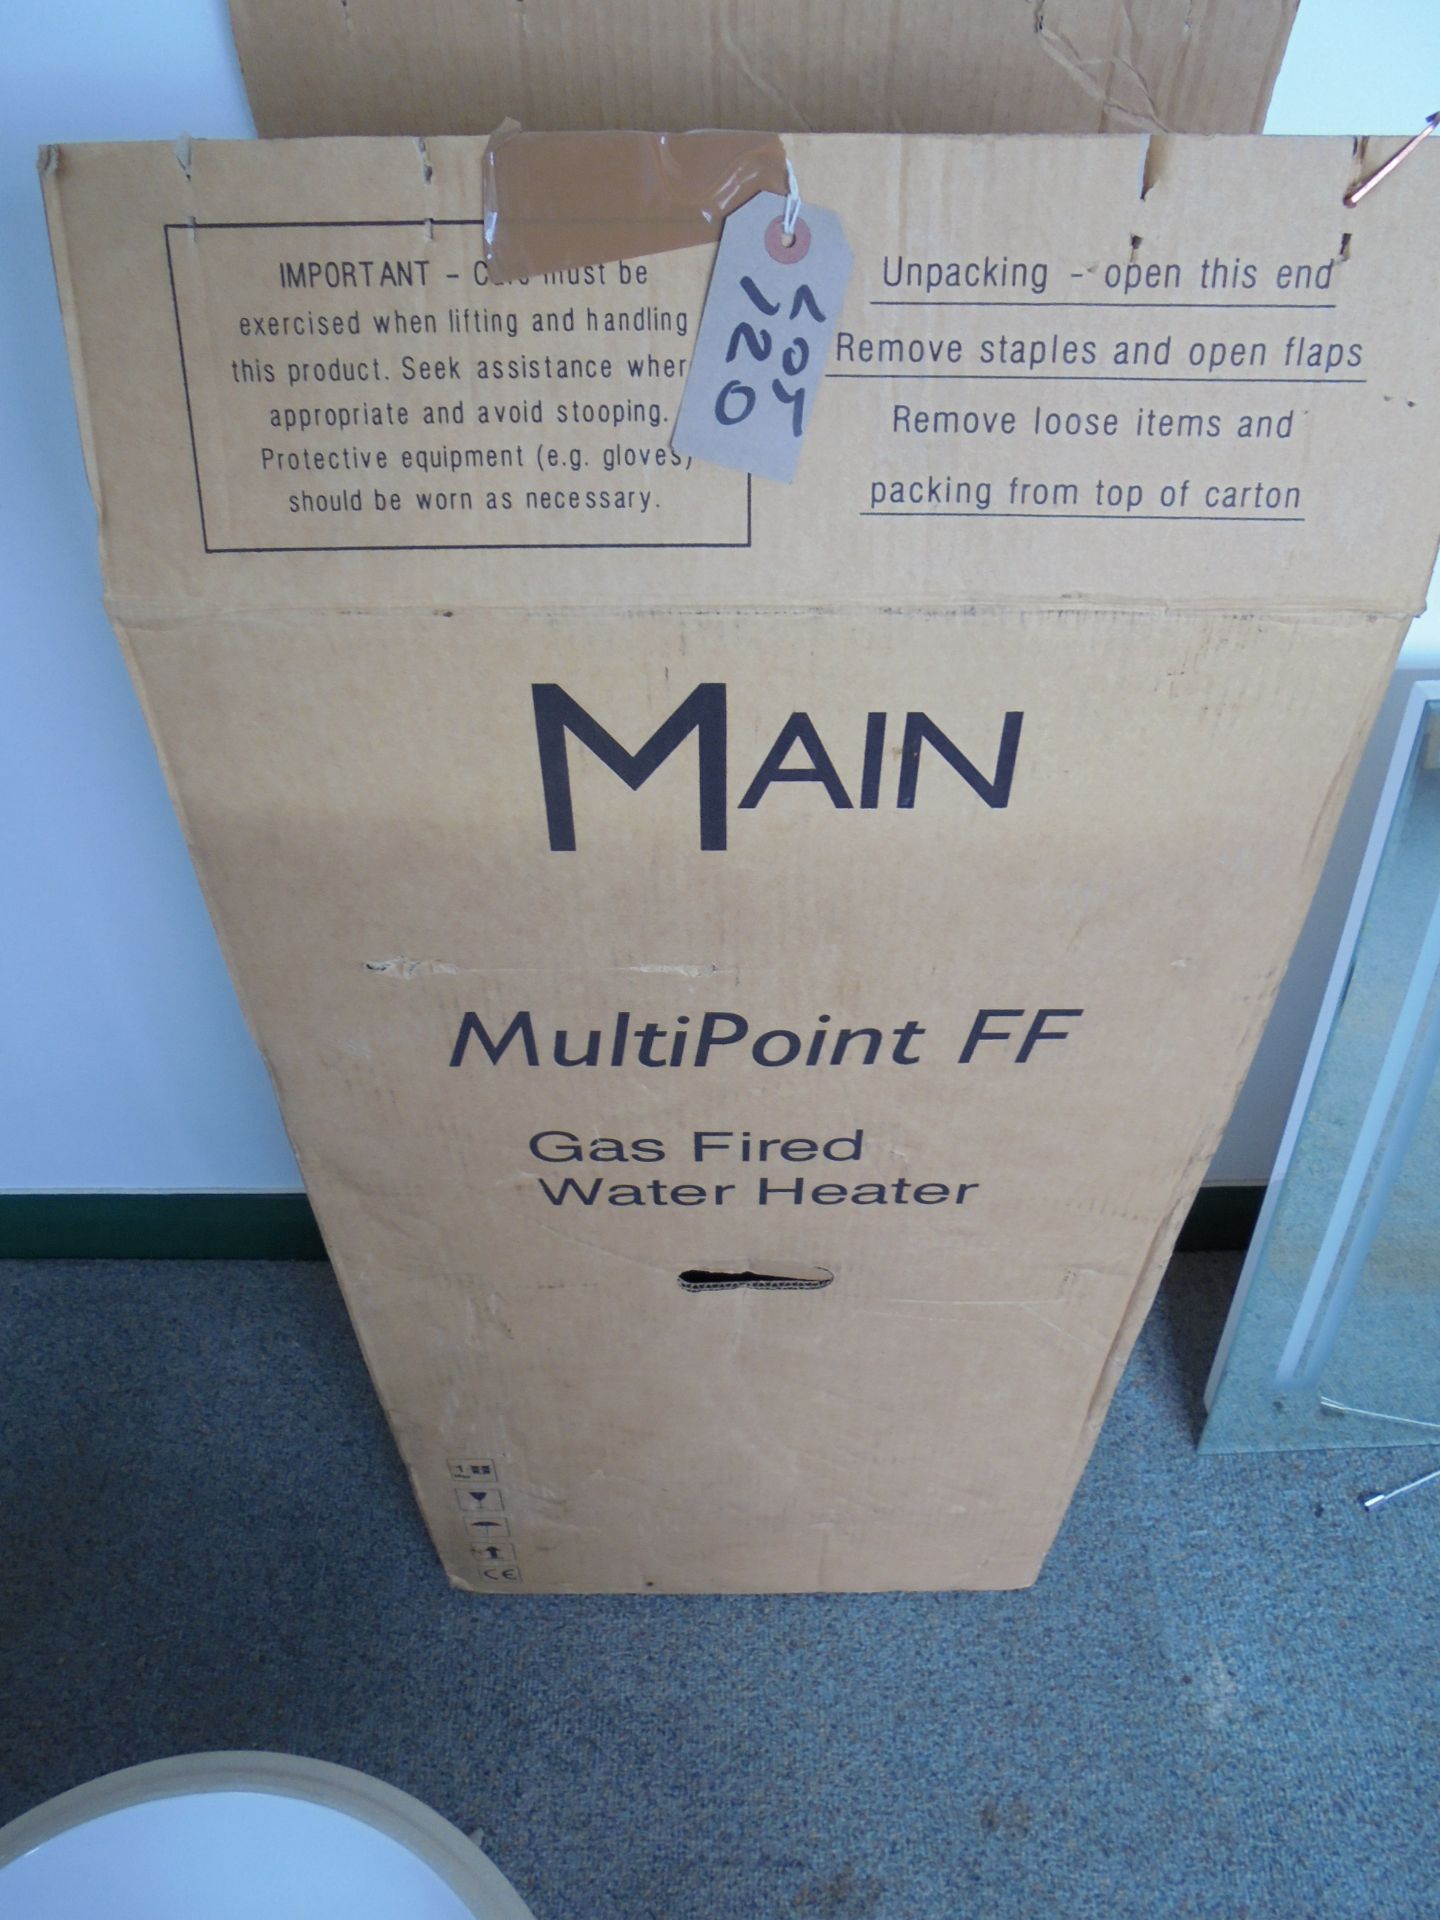 Main Multipoint FF Gas Fired Water Heater with Fittings & Instruction Manual. Boxed as New.